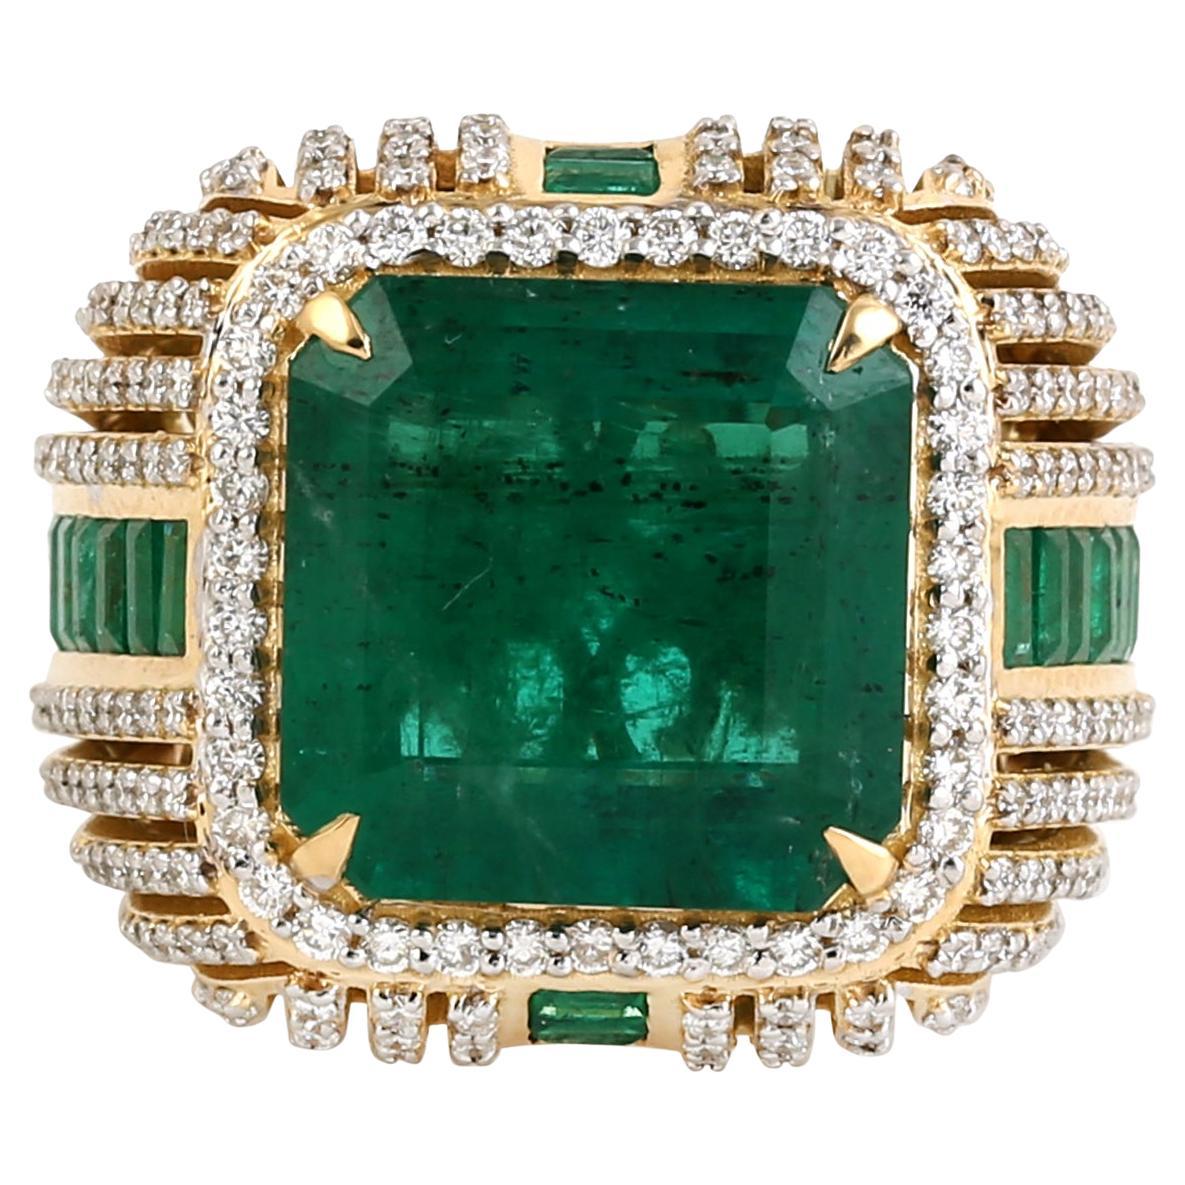 Vintage Looking Zambian Emerald Cocktail Ring With Diamonds